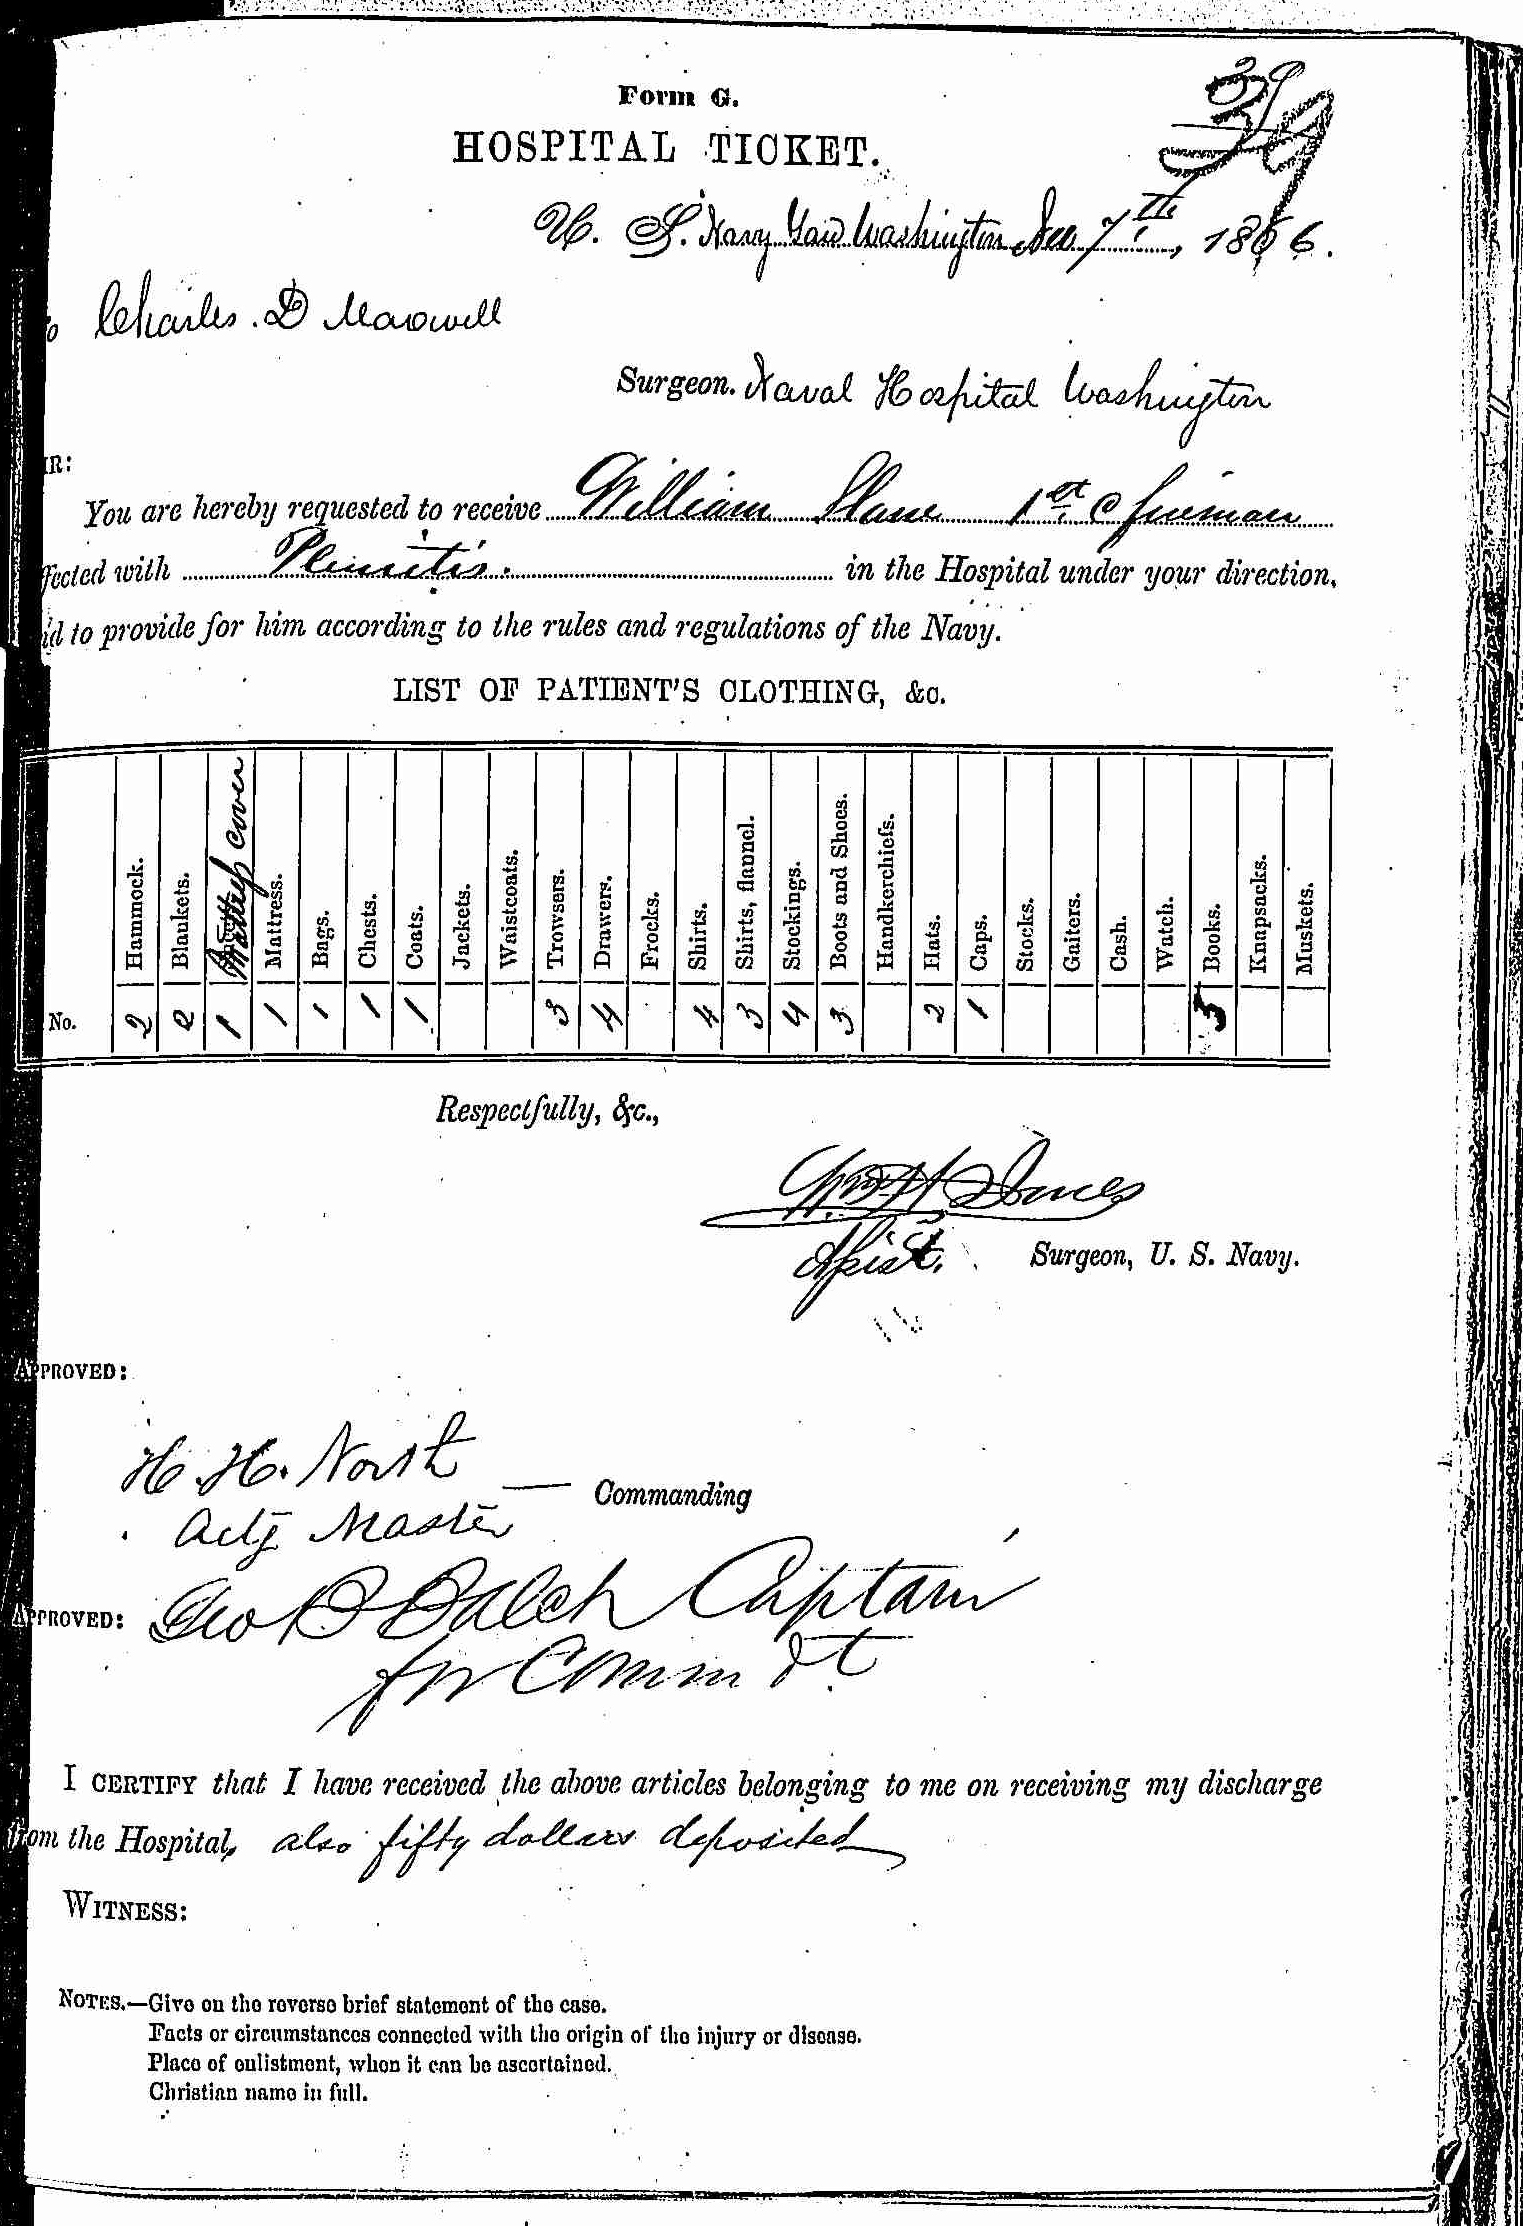 Entry for William Lane (page 1 of 2) in the log Hospital Tickets and Case Papers - Naval Hospital - Washington, D.C. - 1865-68